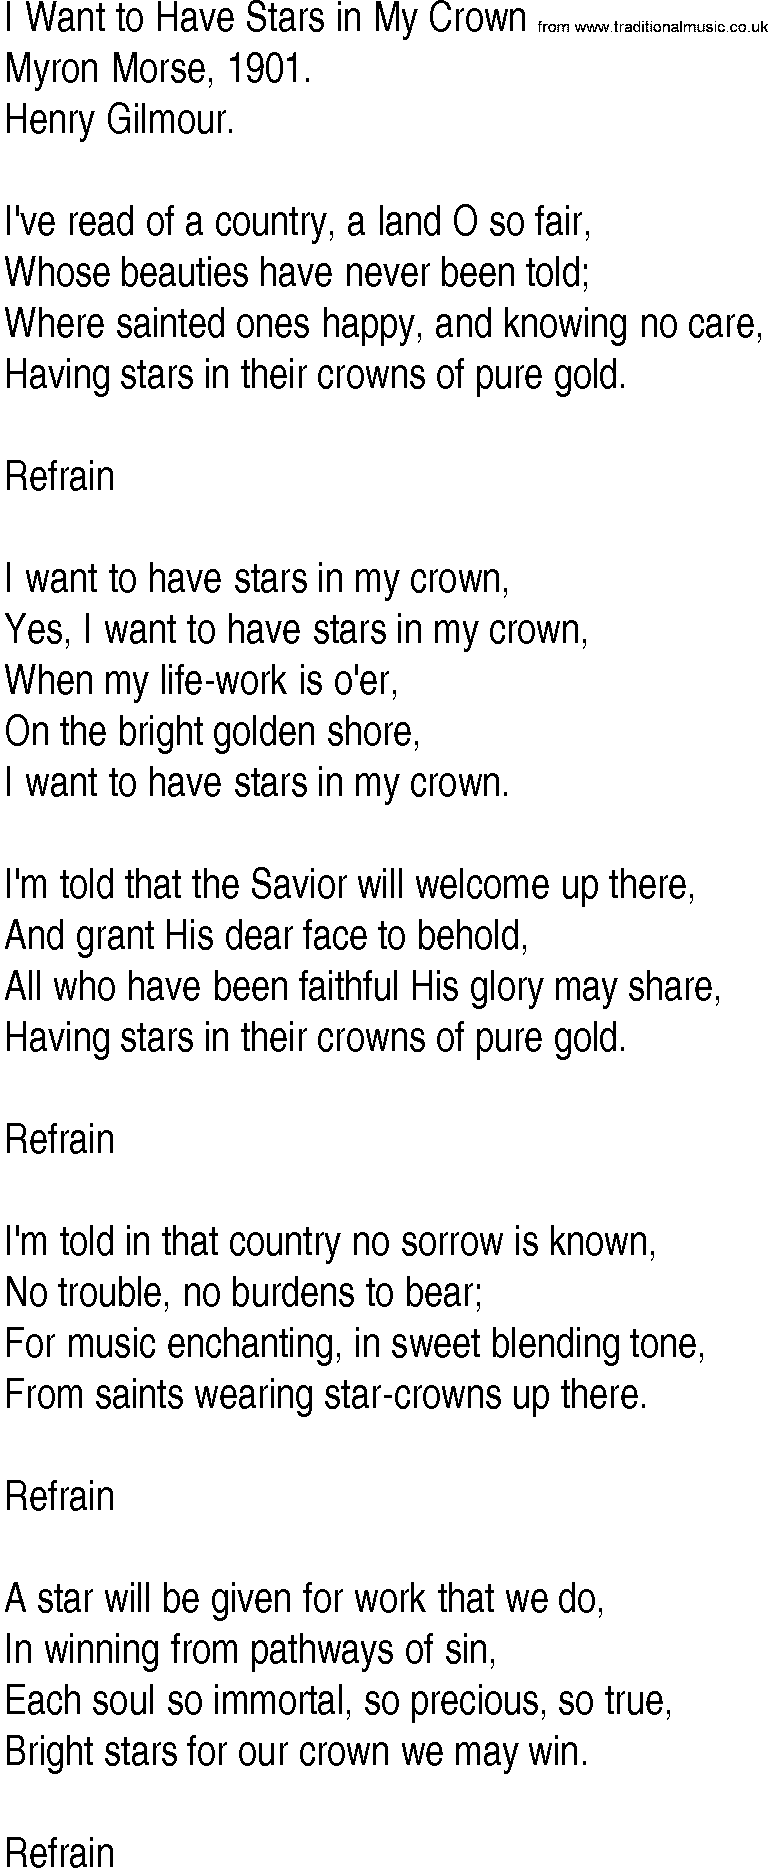 Hymn and Gospel Song: I Want to Have Stars in My Crown by Myron Morse lyrics